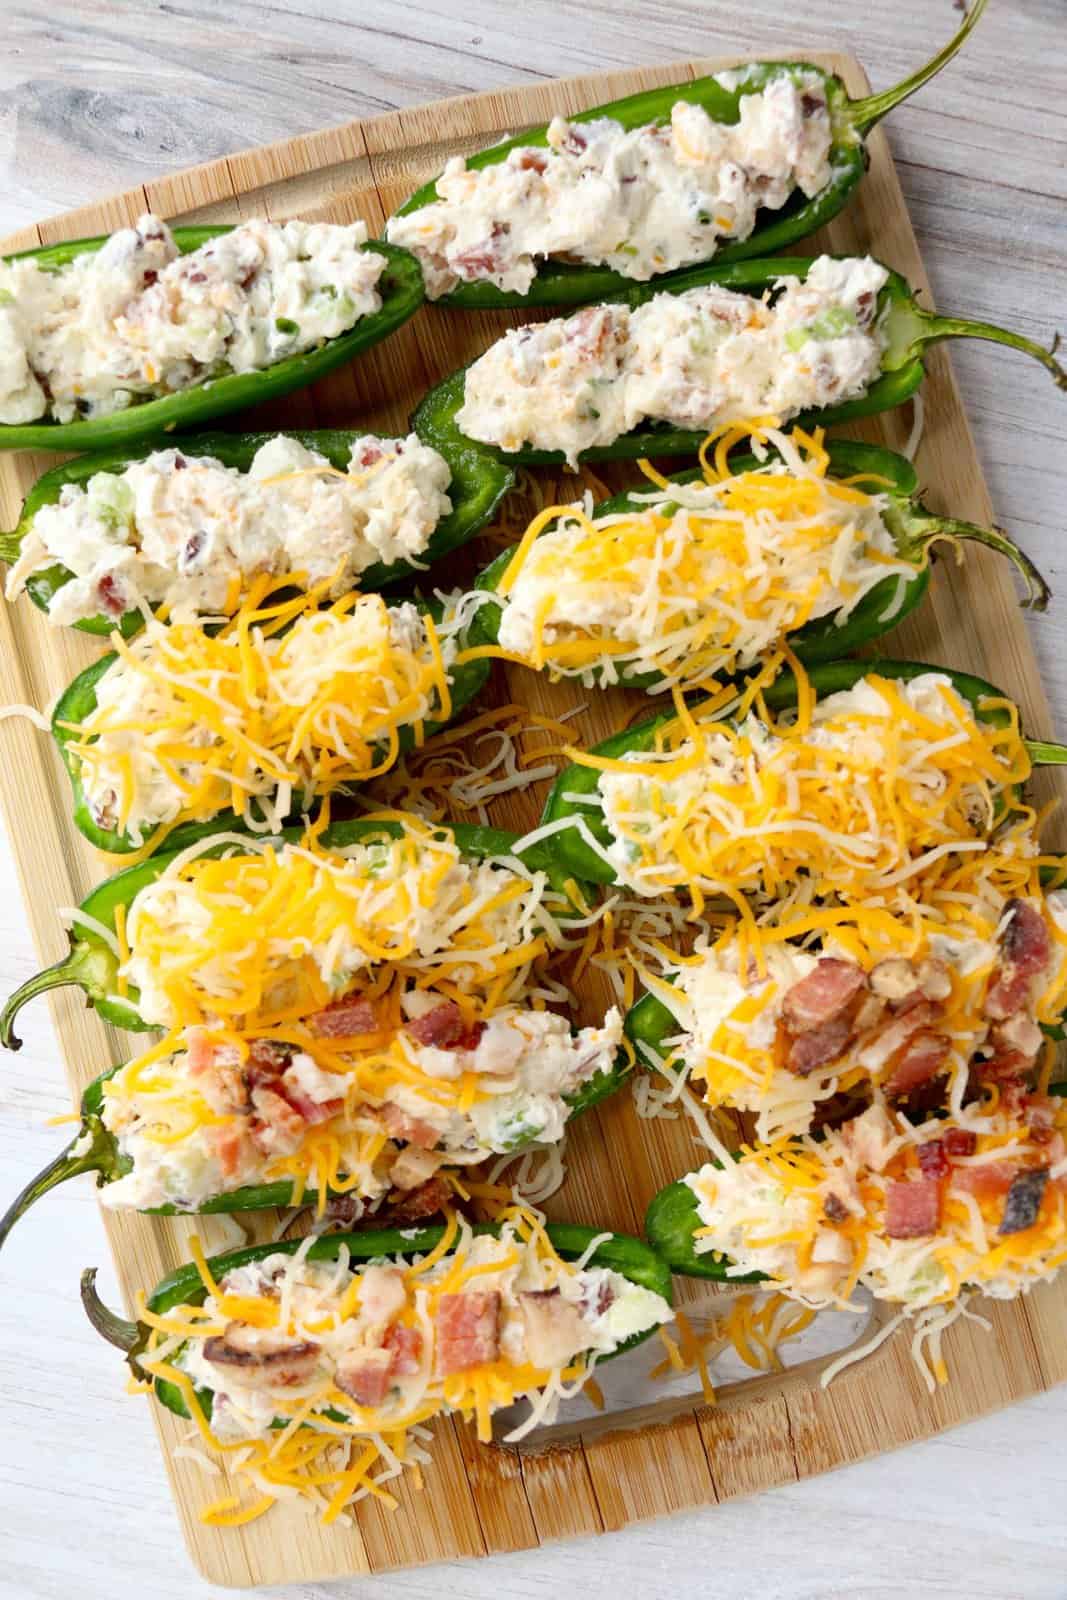 jalapenos being shown stuffed with cream cheese mixture and being topped with sliced cheese and cooked bacon.